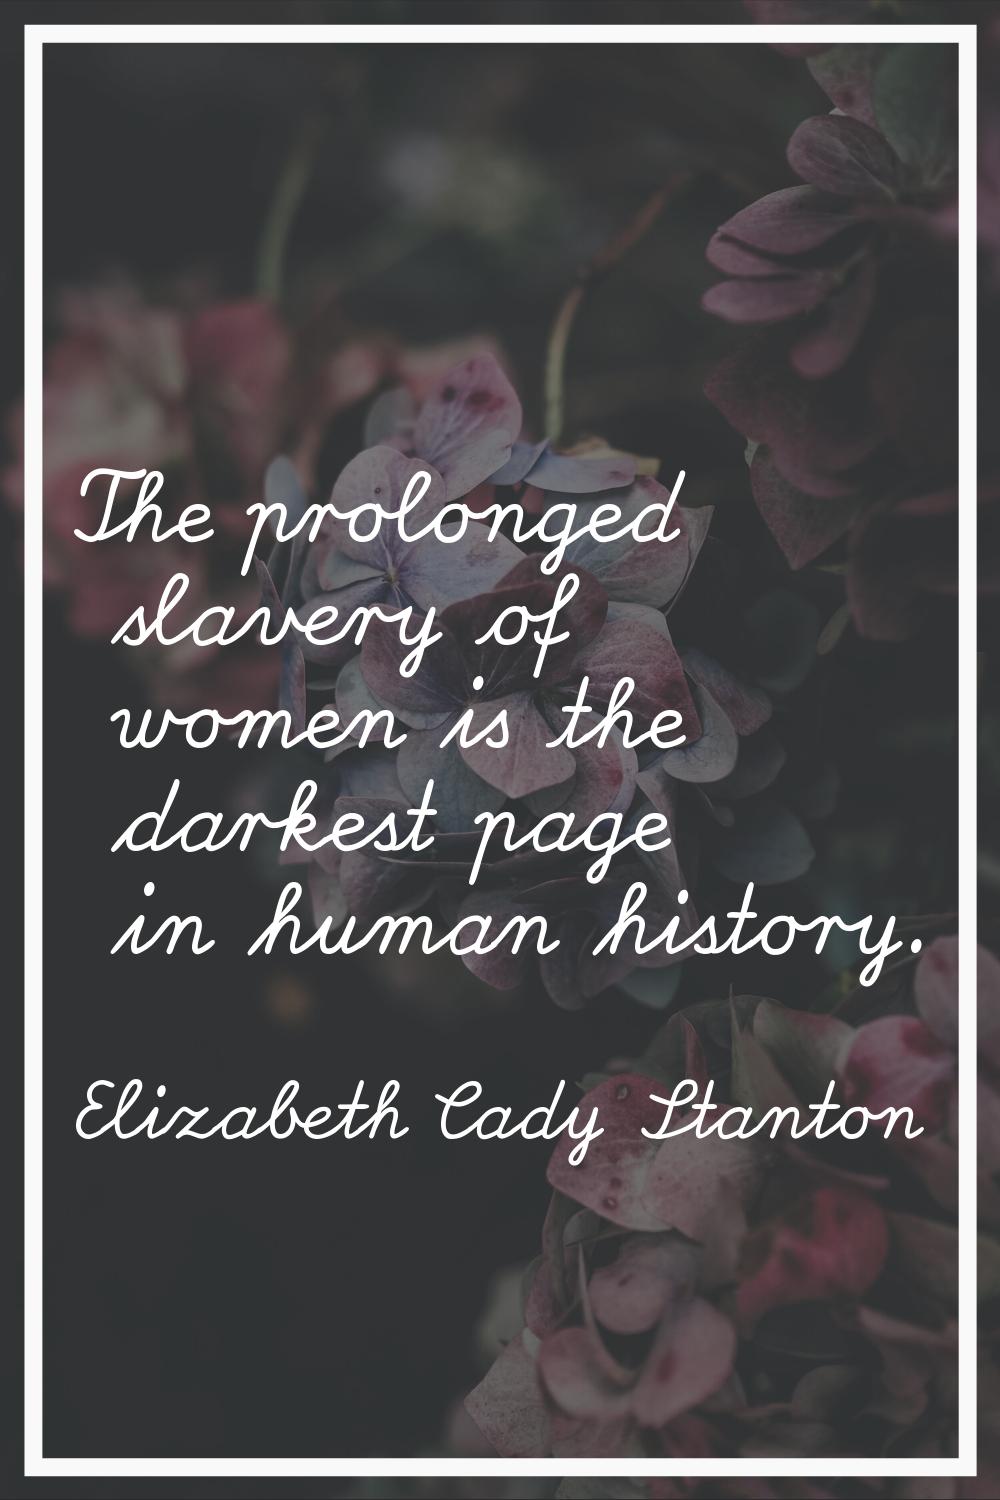 The prolonged slavery of women is the darkest page in human history.